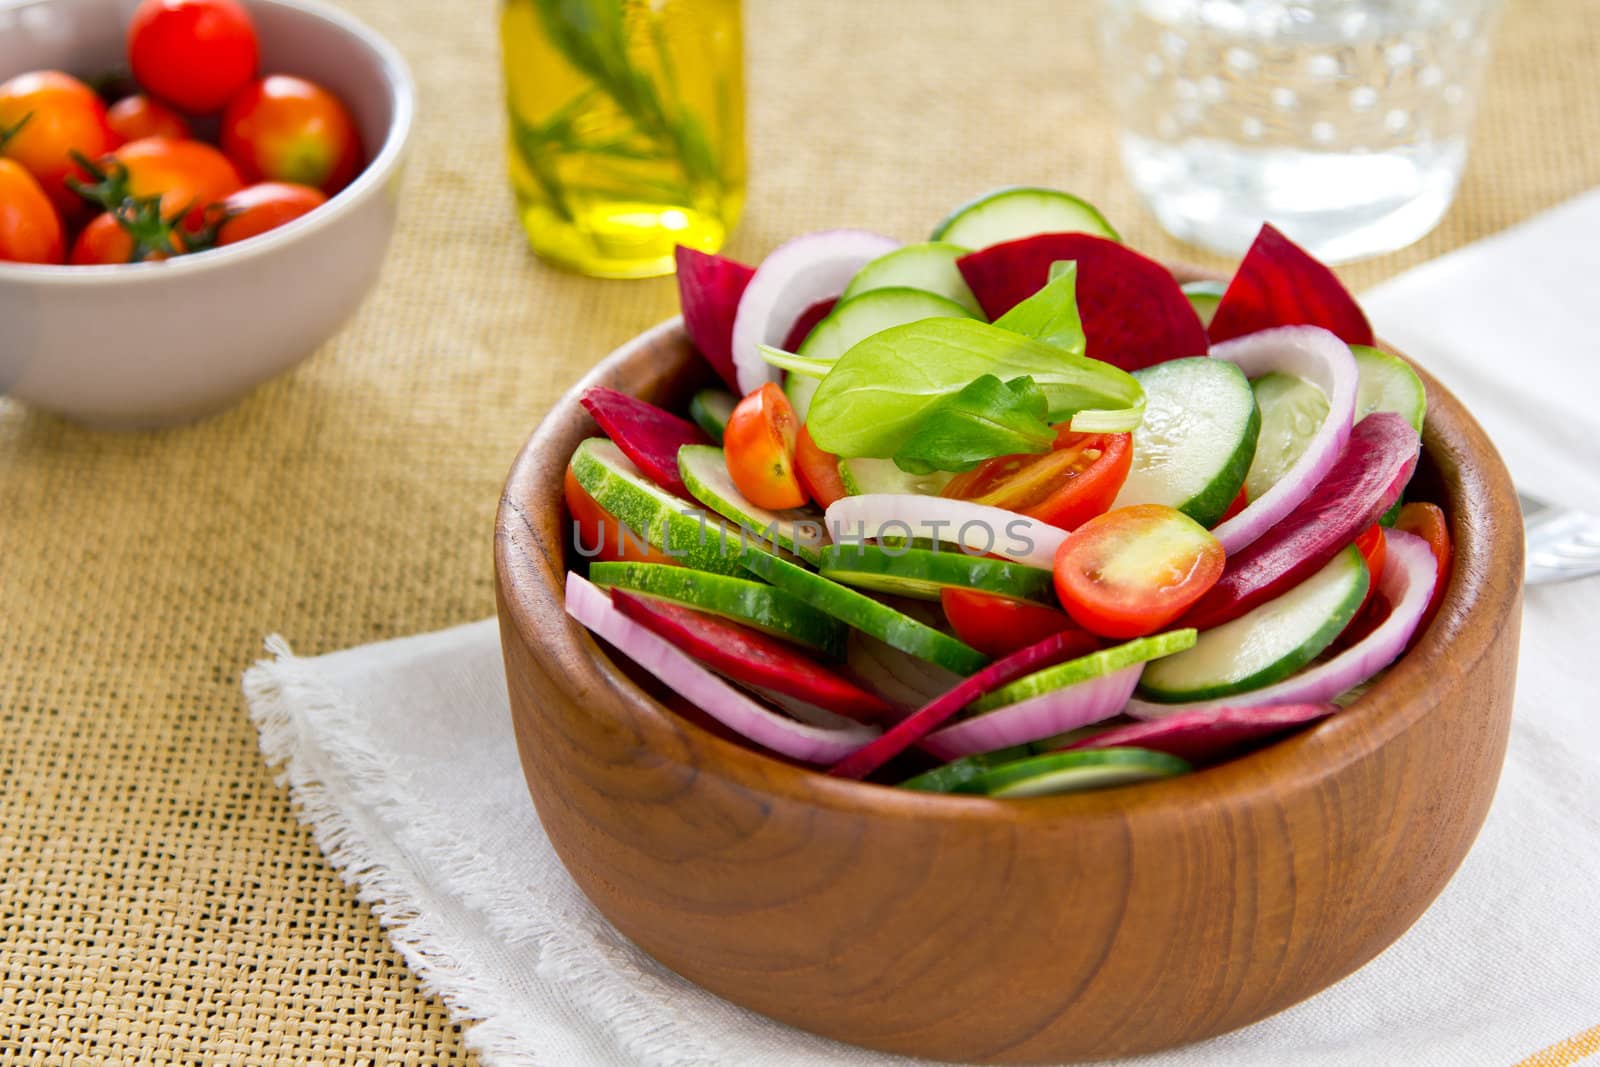 Cucumber and Beetroot with cherry tomato and onion salad